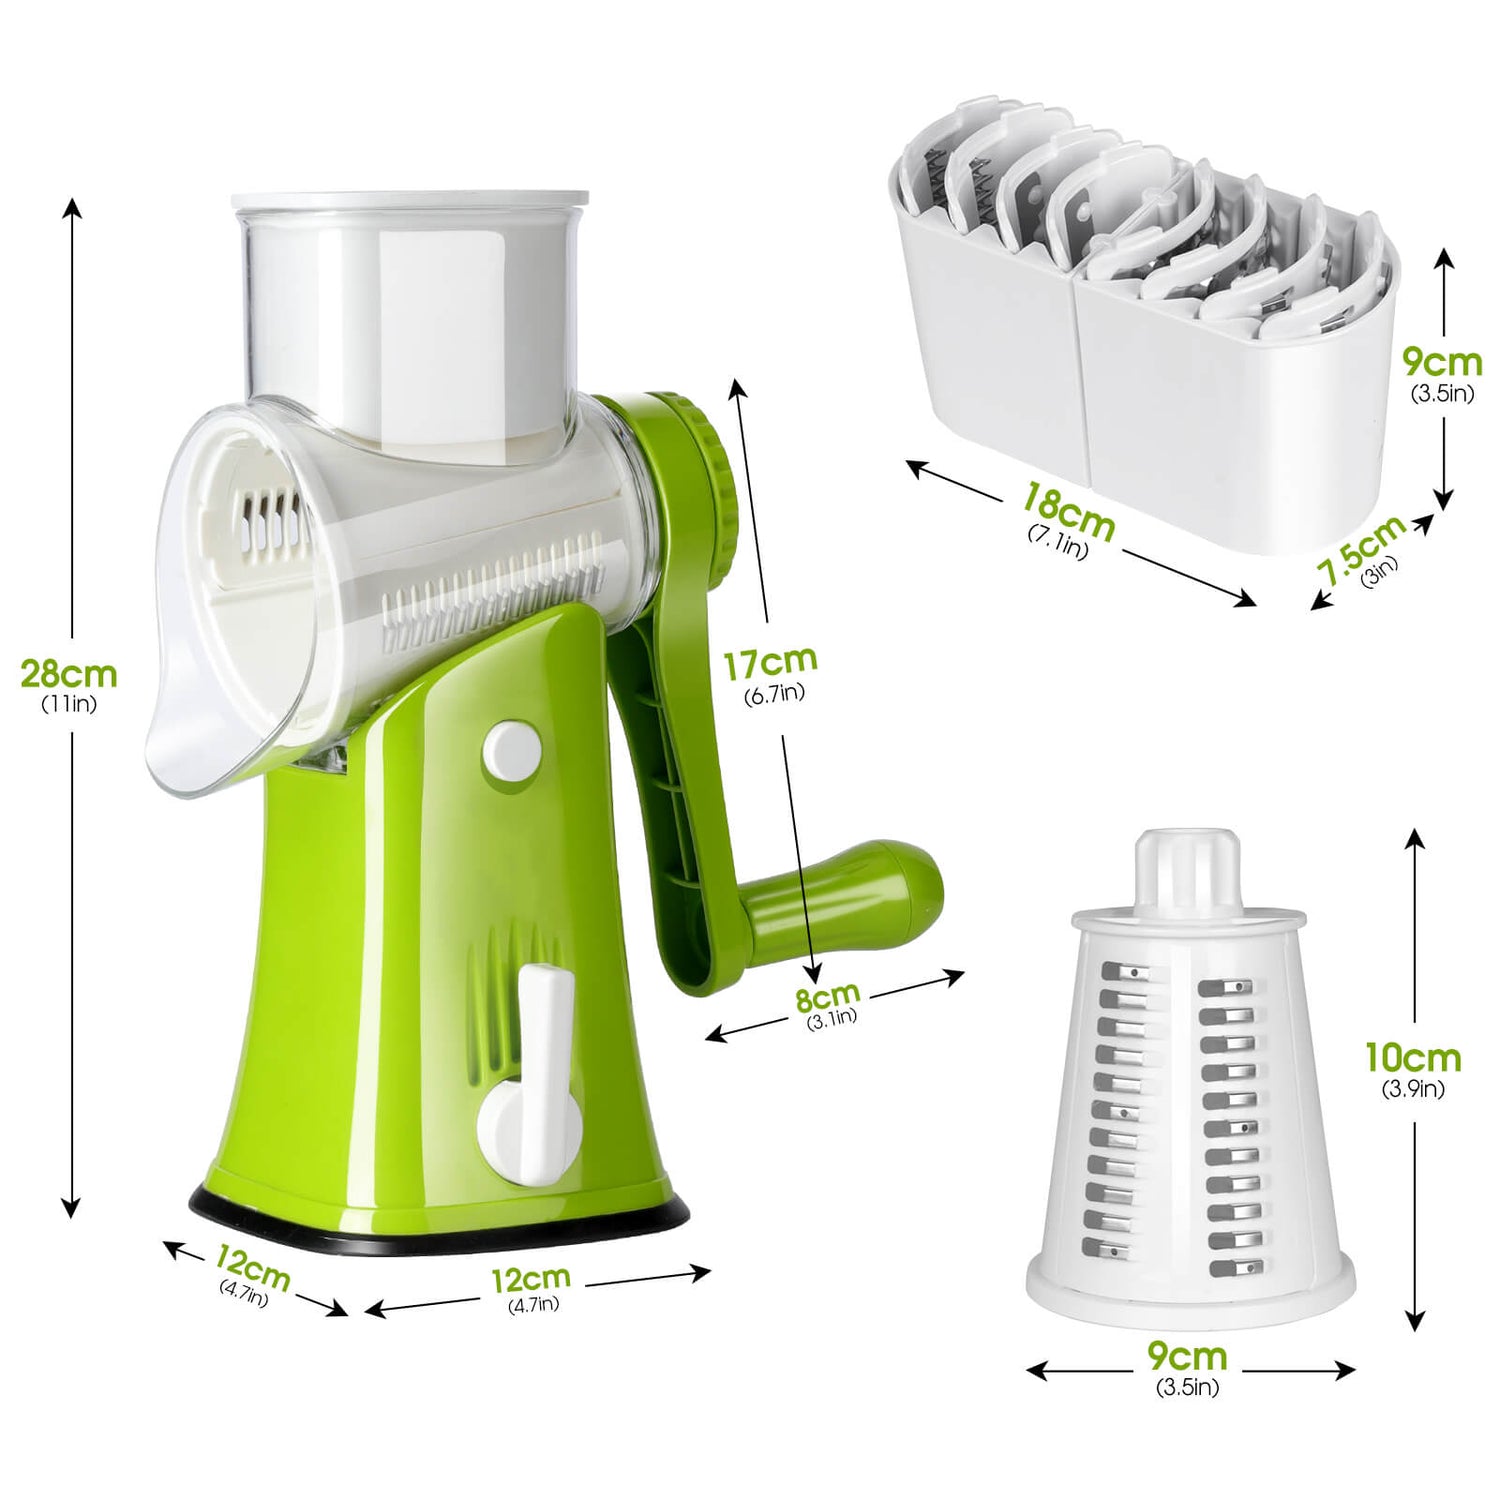 Stainless Steel Cheese Grater Manual Rotary Cheese Shredder with 4